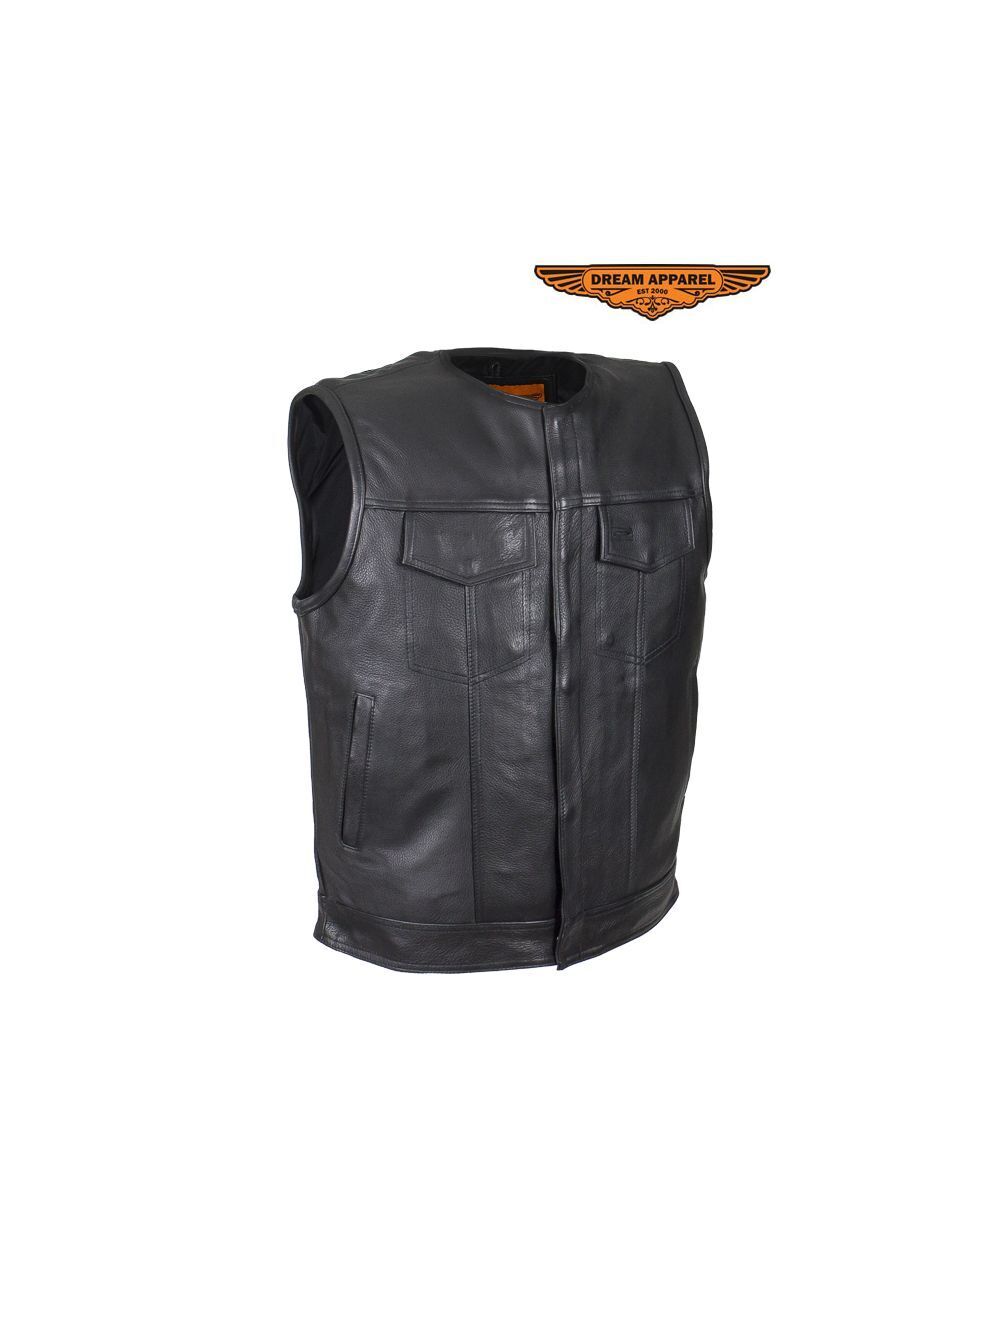 Mens Leather Motorcycle Vest No Collar Concealed Carry Gun Pockets